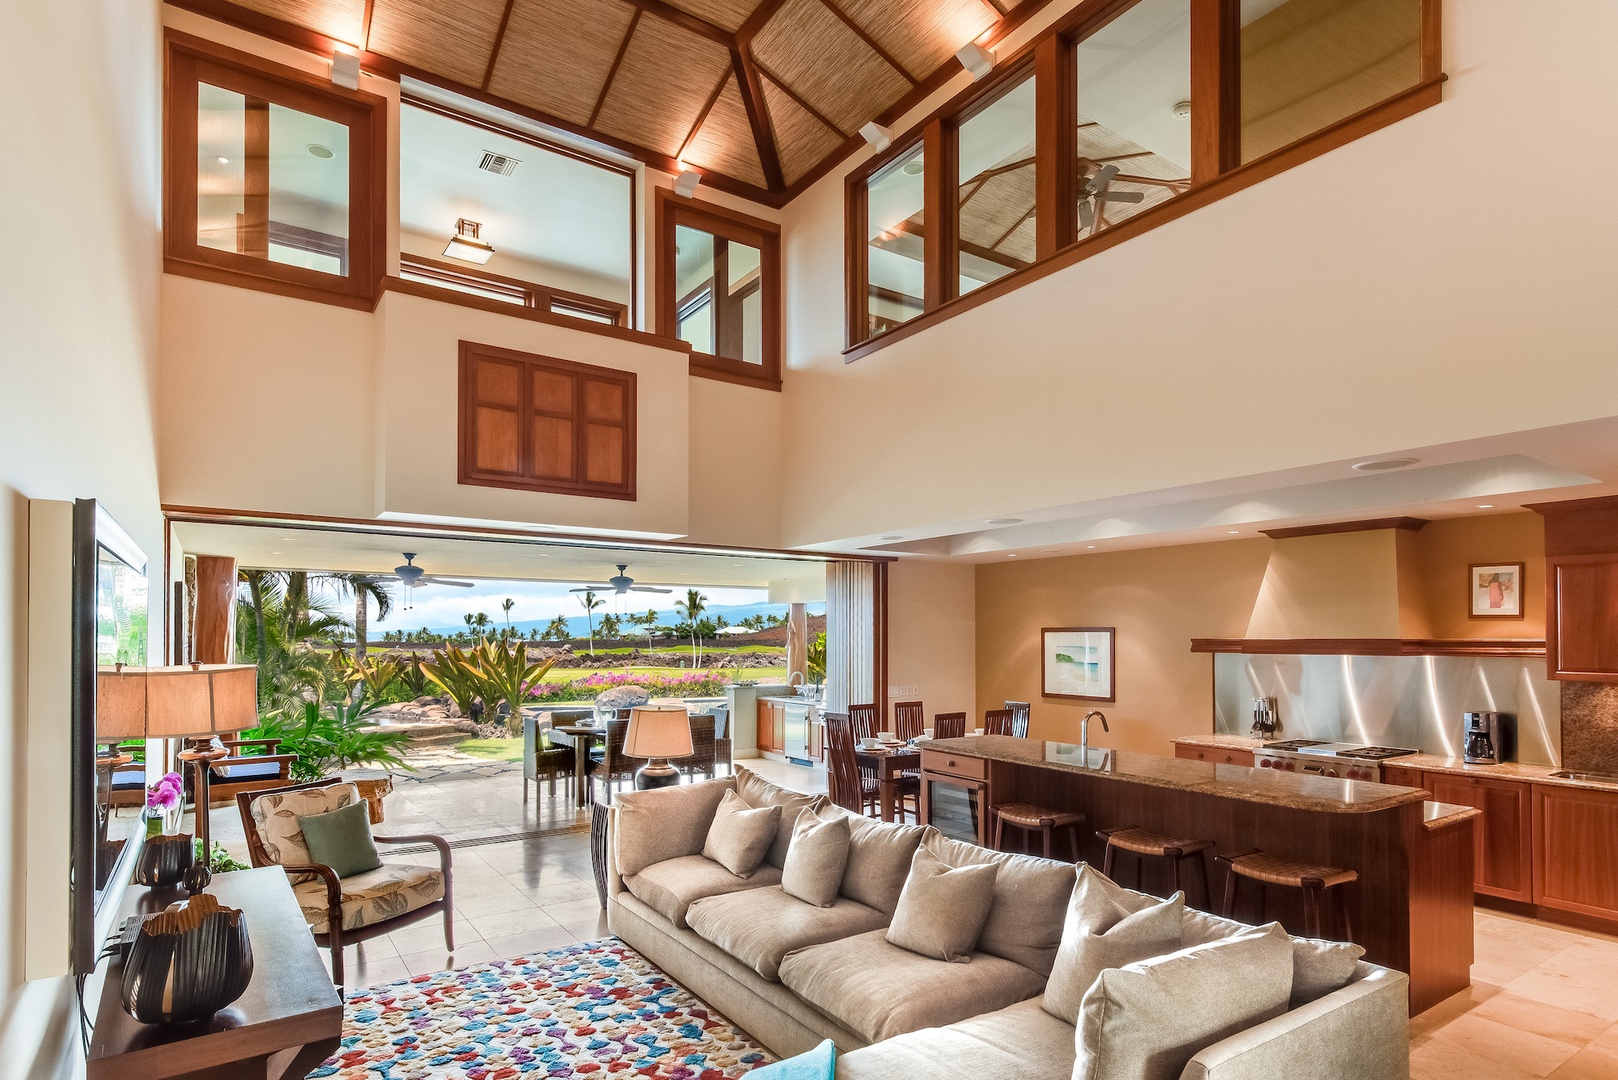 Kamuela Vacation Rentals, 3BD Ke Kailani (1C) at Mauna Lani Resort - Spacious & Elegantly Appointed Living Room w/ Vaulted Ceilings & Electronic Pocket Doors that Open to Lanai and Pool Area